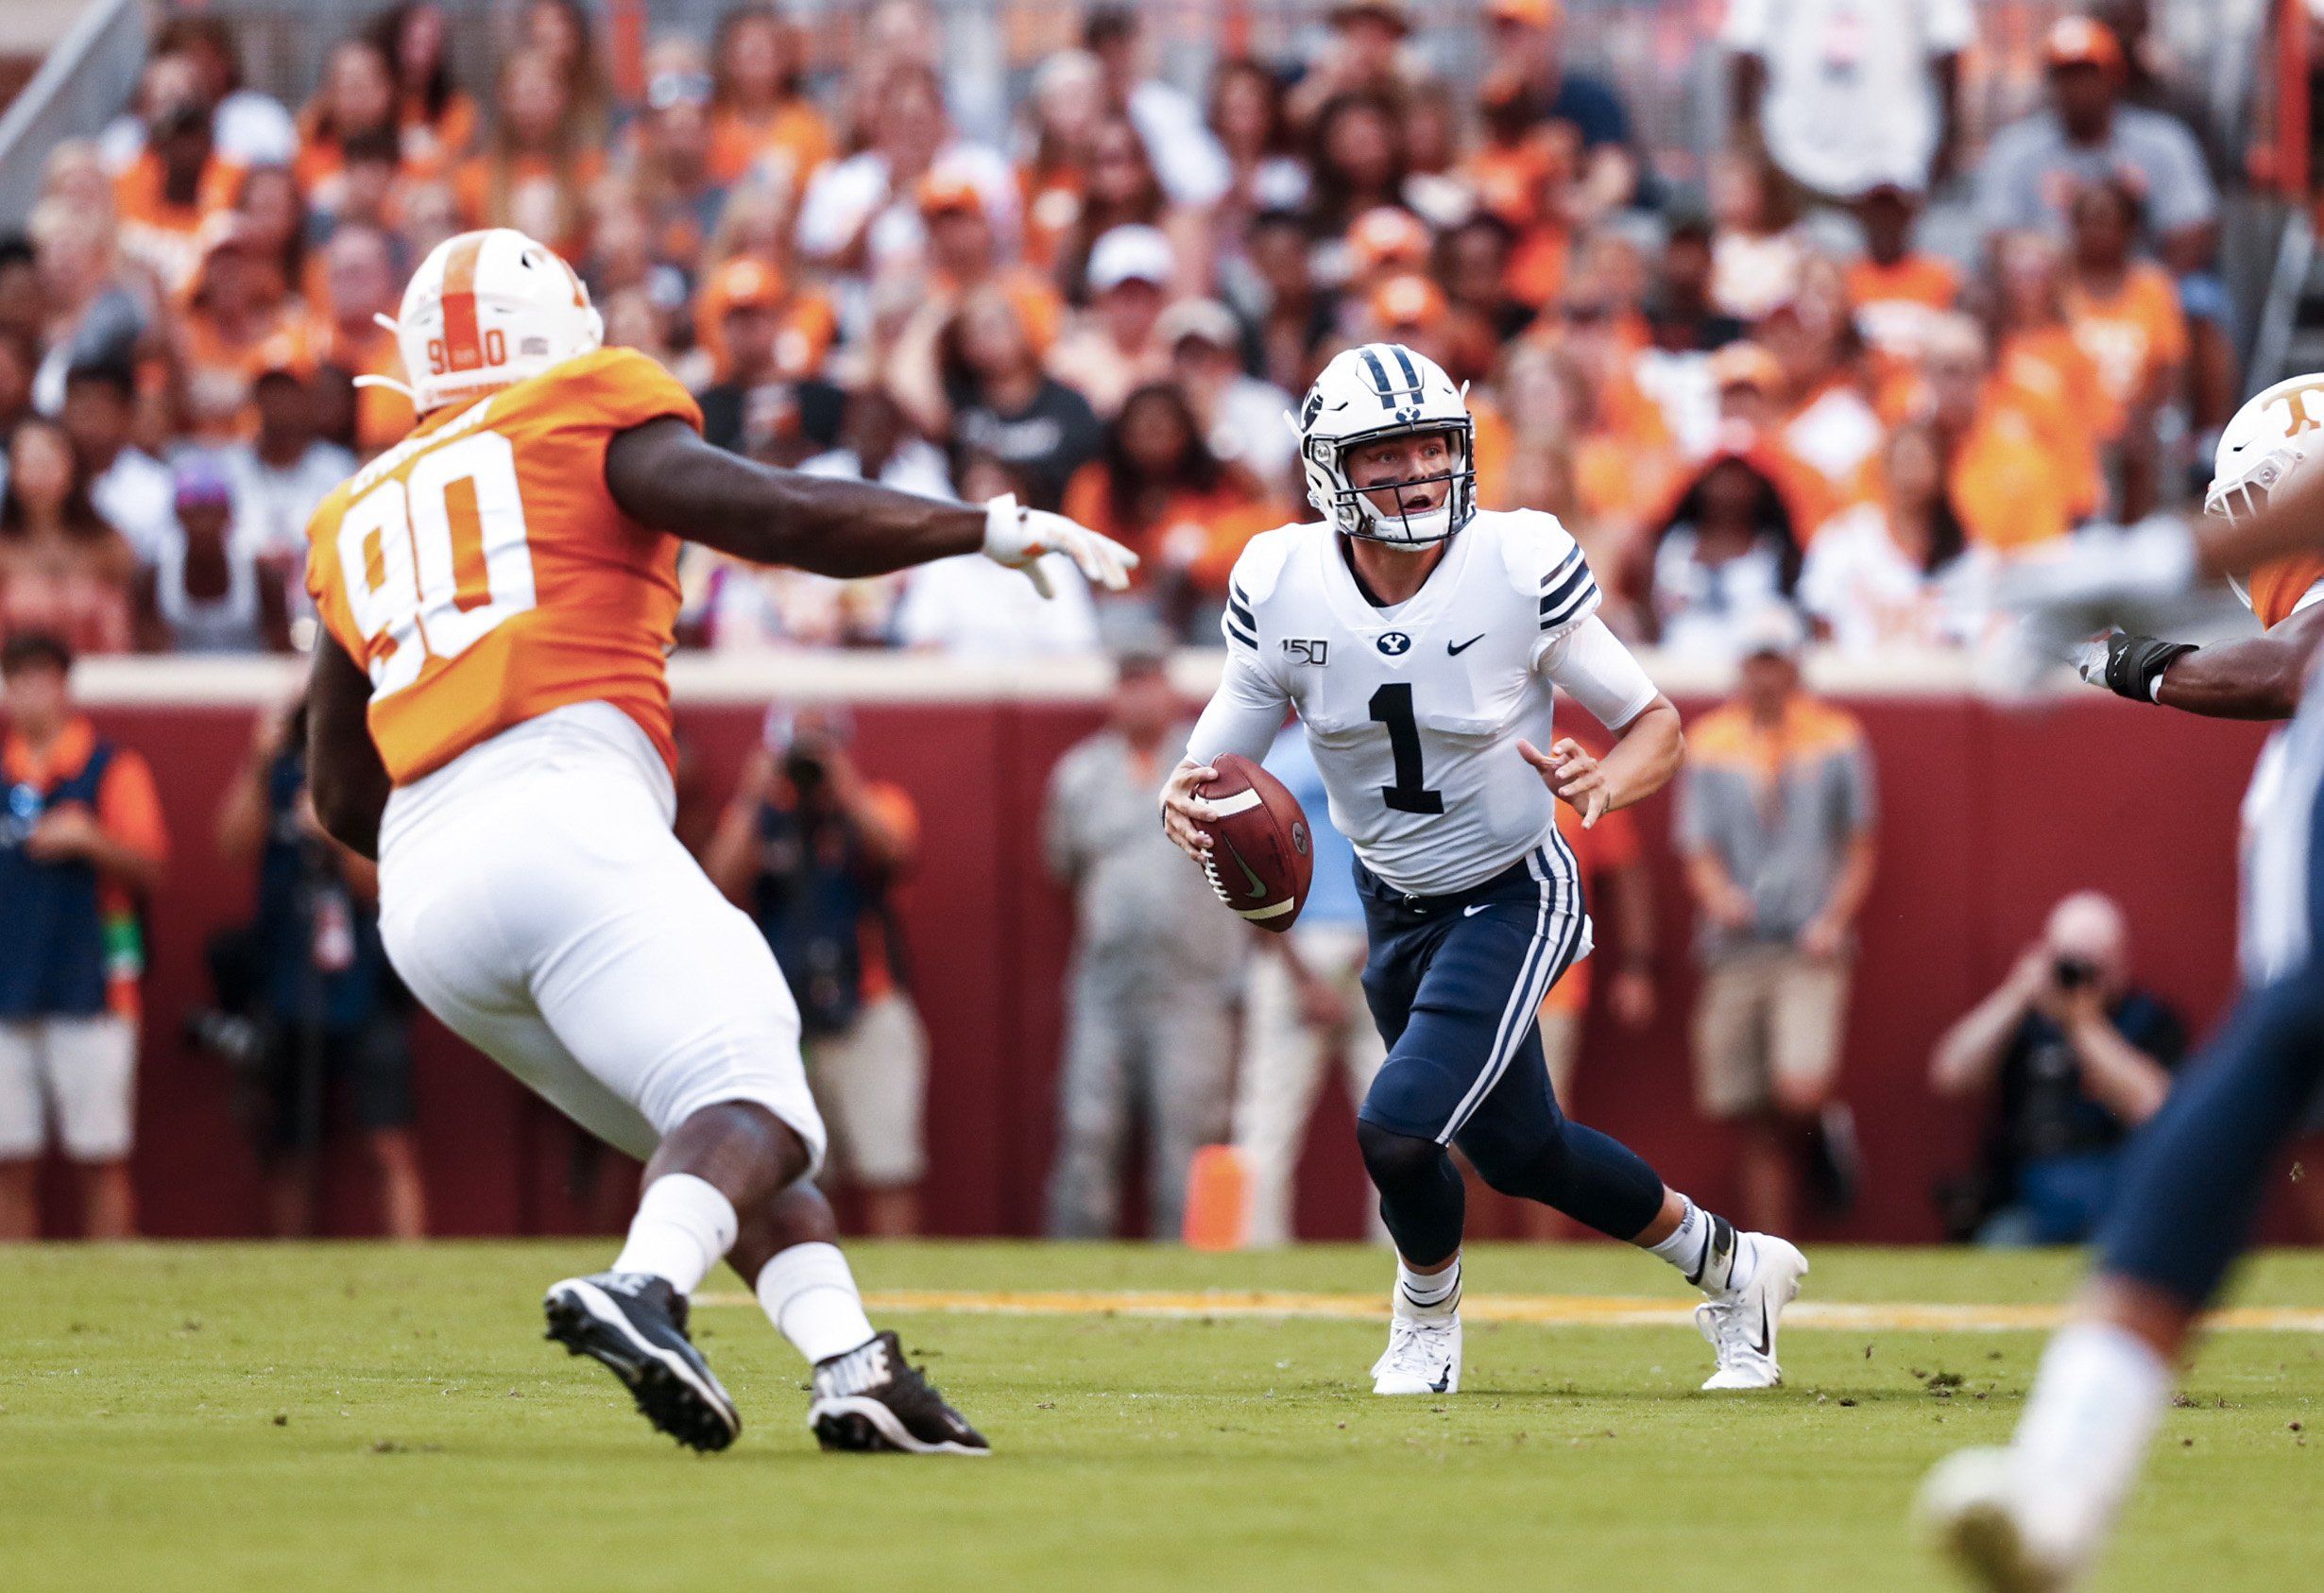 BYU Fans Should Temper Expectations, Despite Tennessee Win